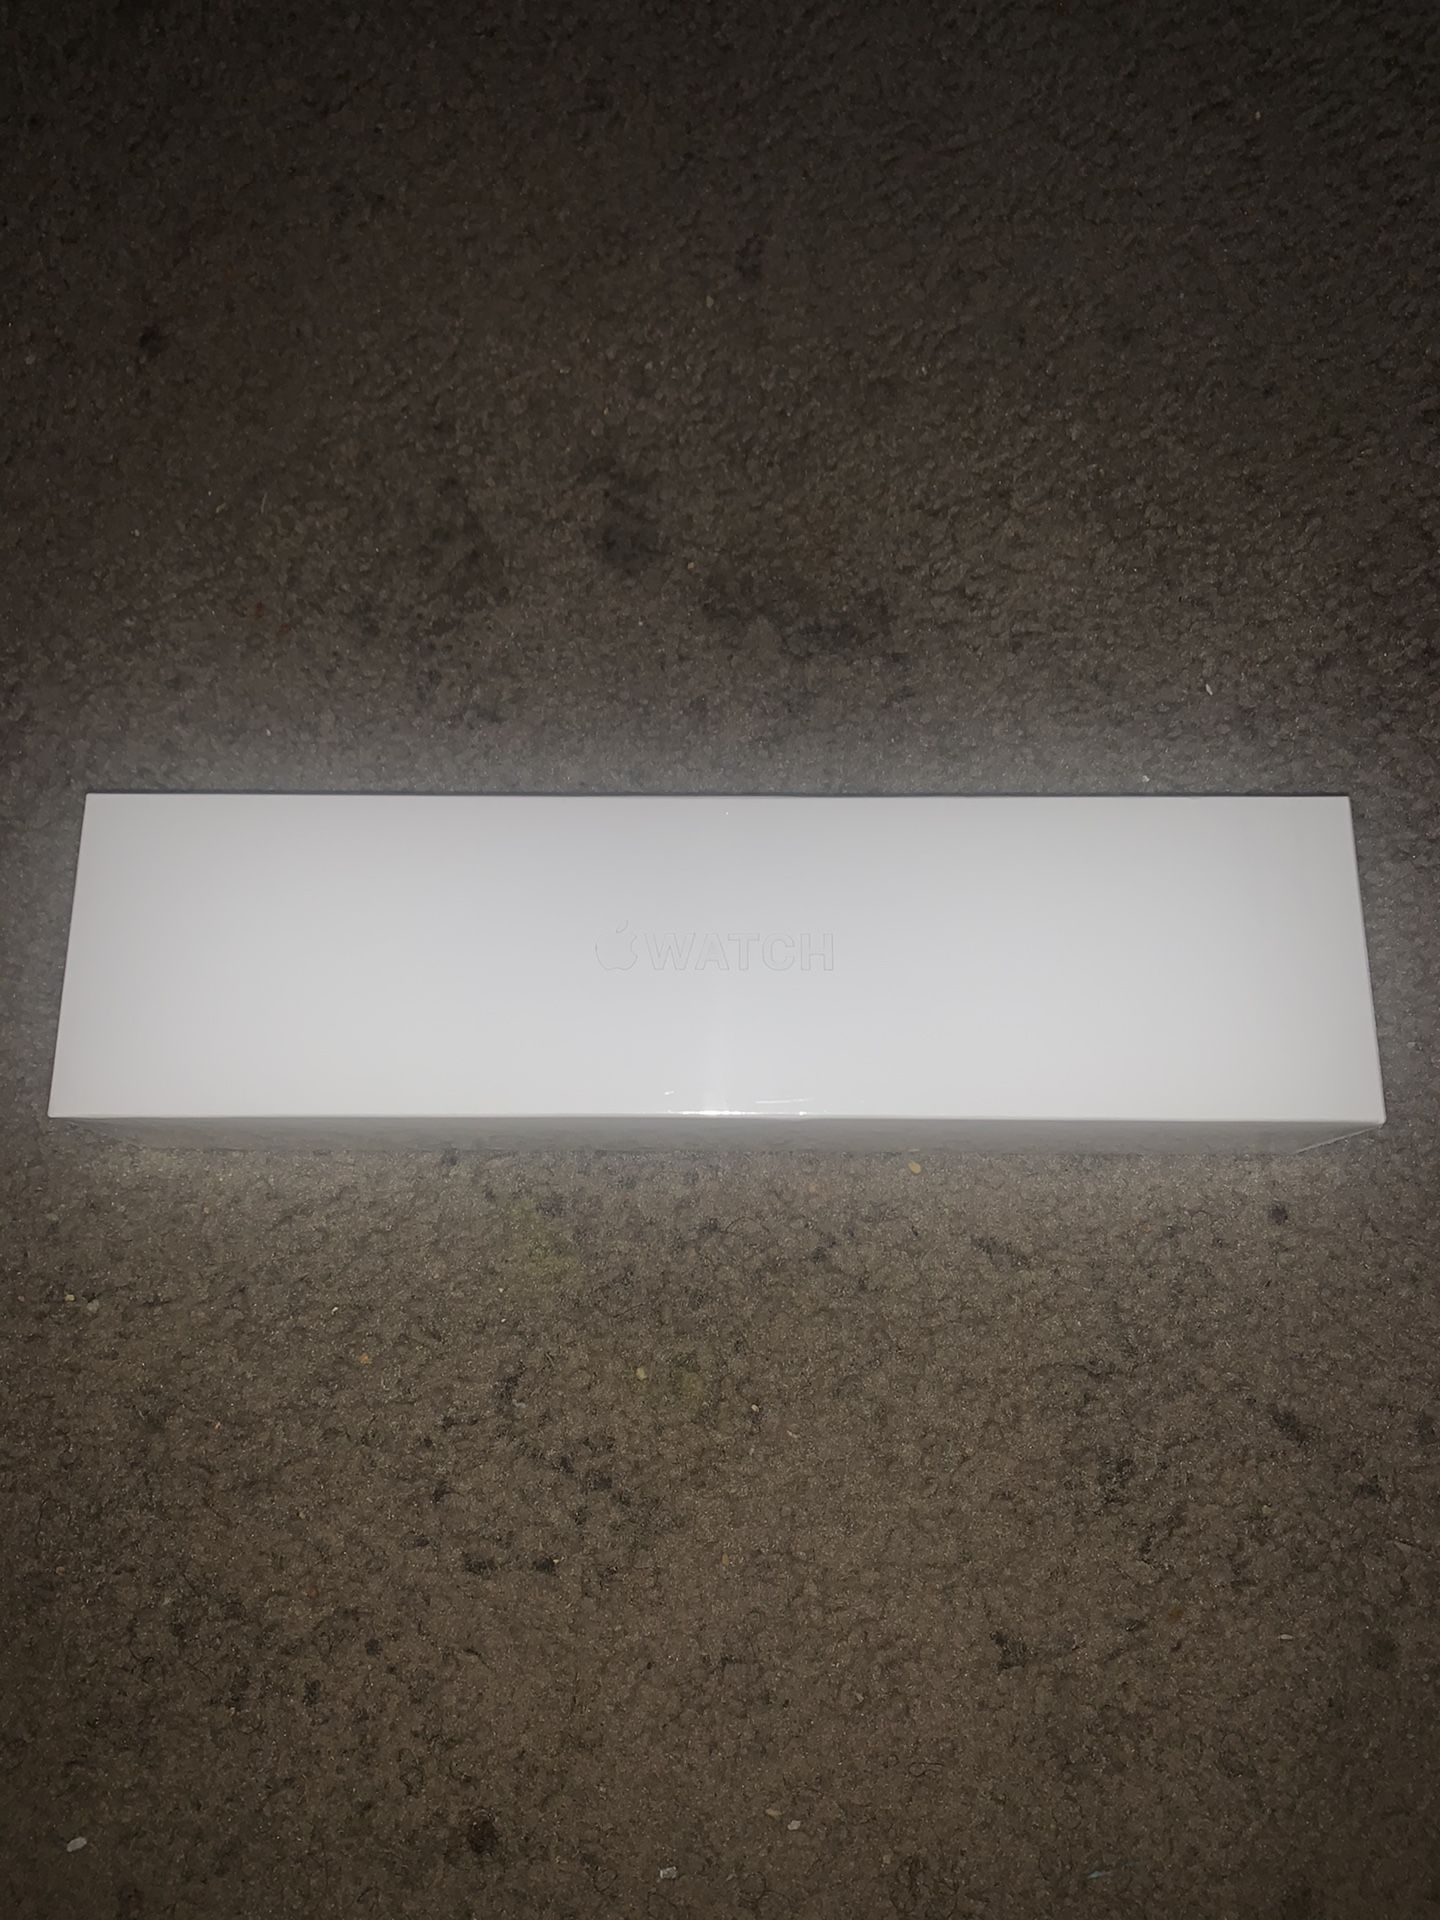 Brand new Apple Watch series 5 40mm still I’m plastic SERIOUS BUYERS ONLY SHIPPING ONLY